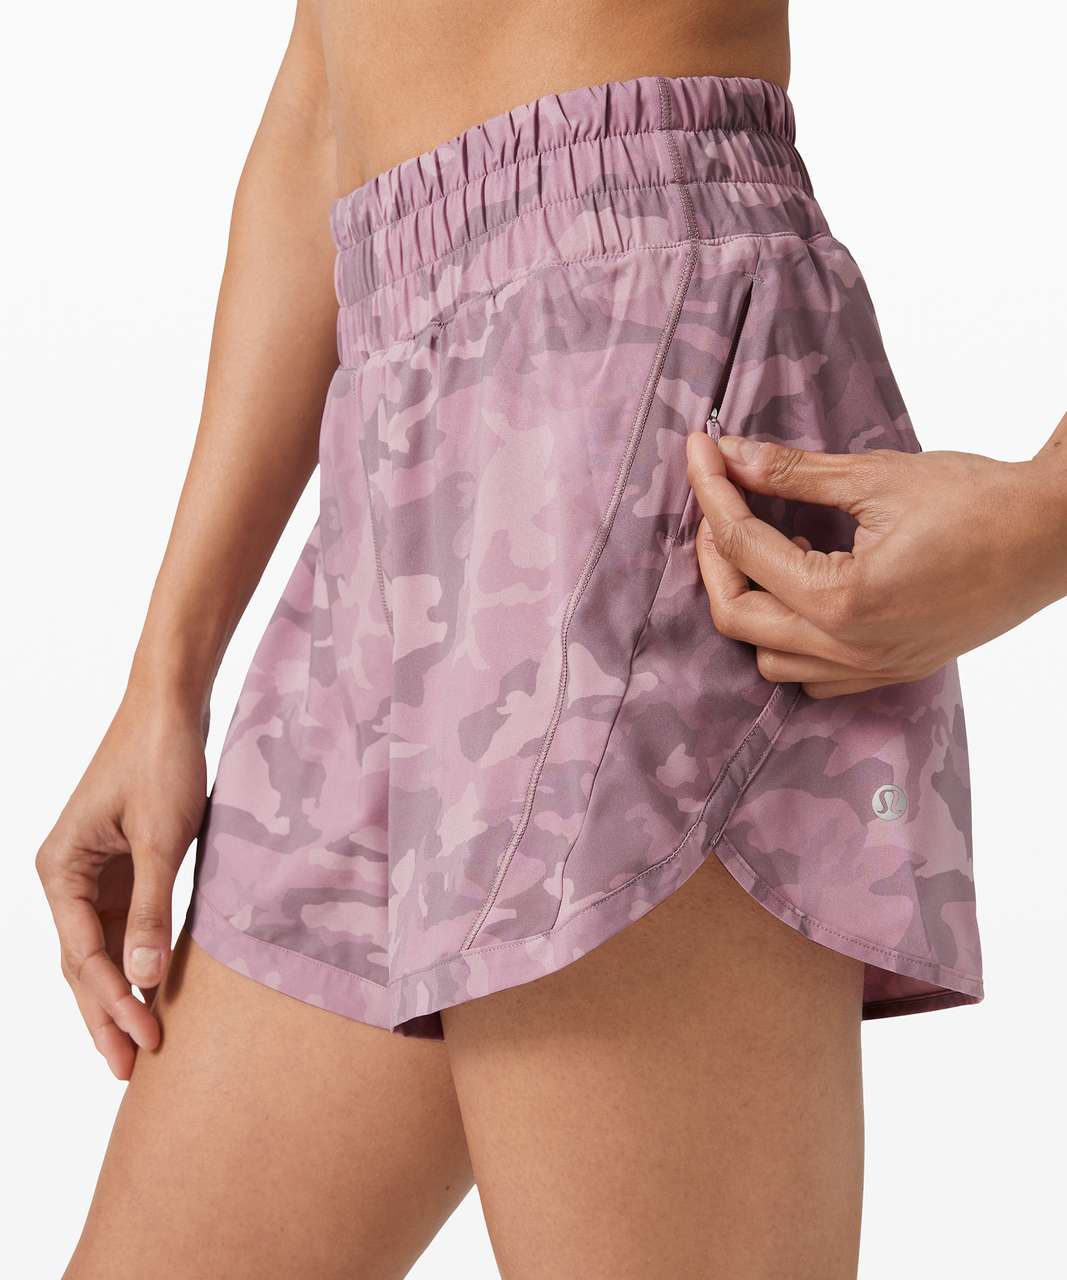 Lululemon Track That Mid-Rise Short 5" - Incognito Camo Pink Taupe Multi